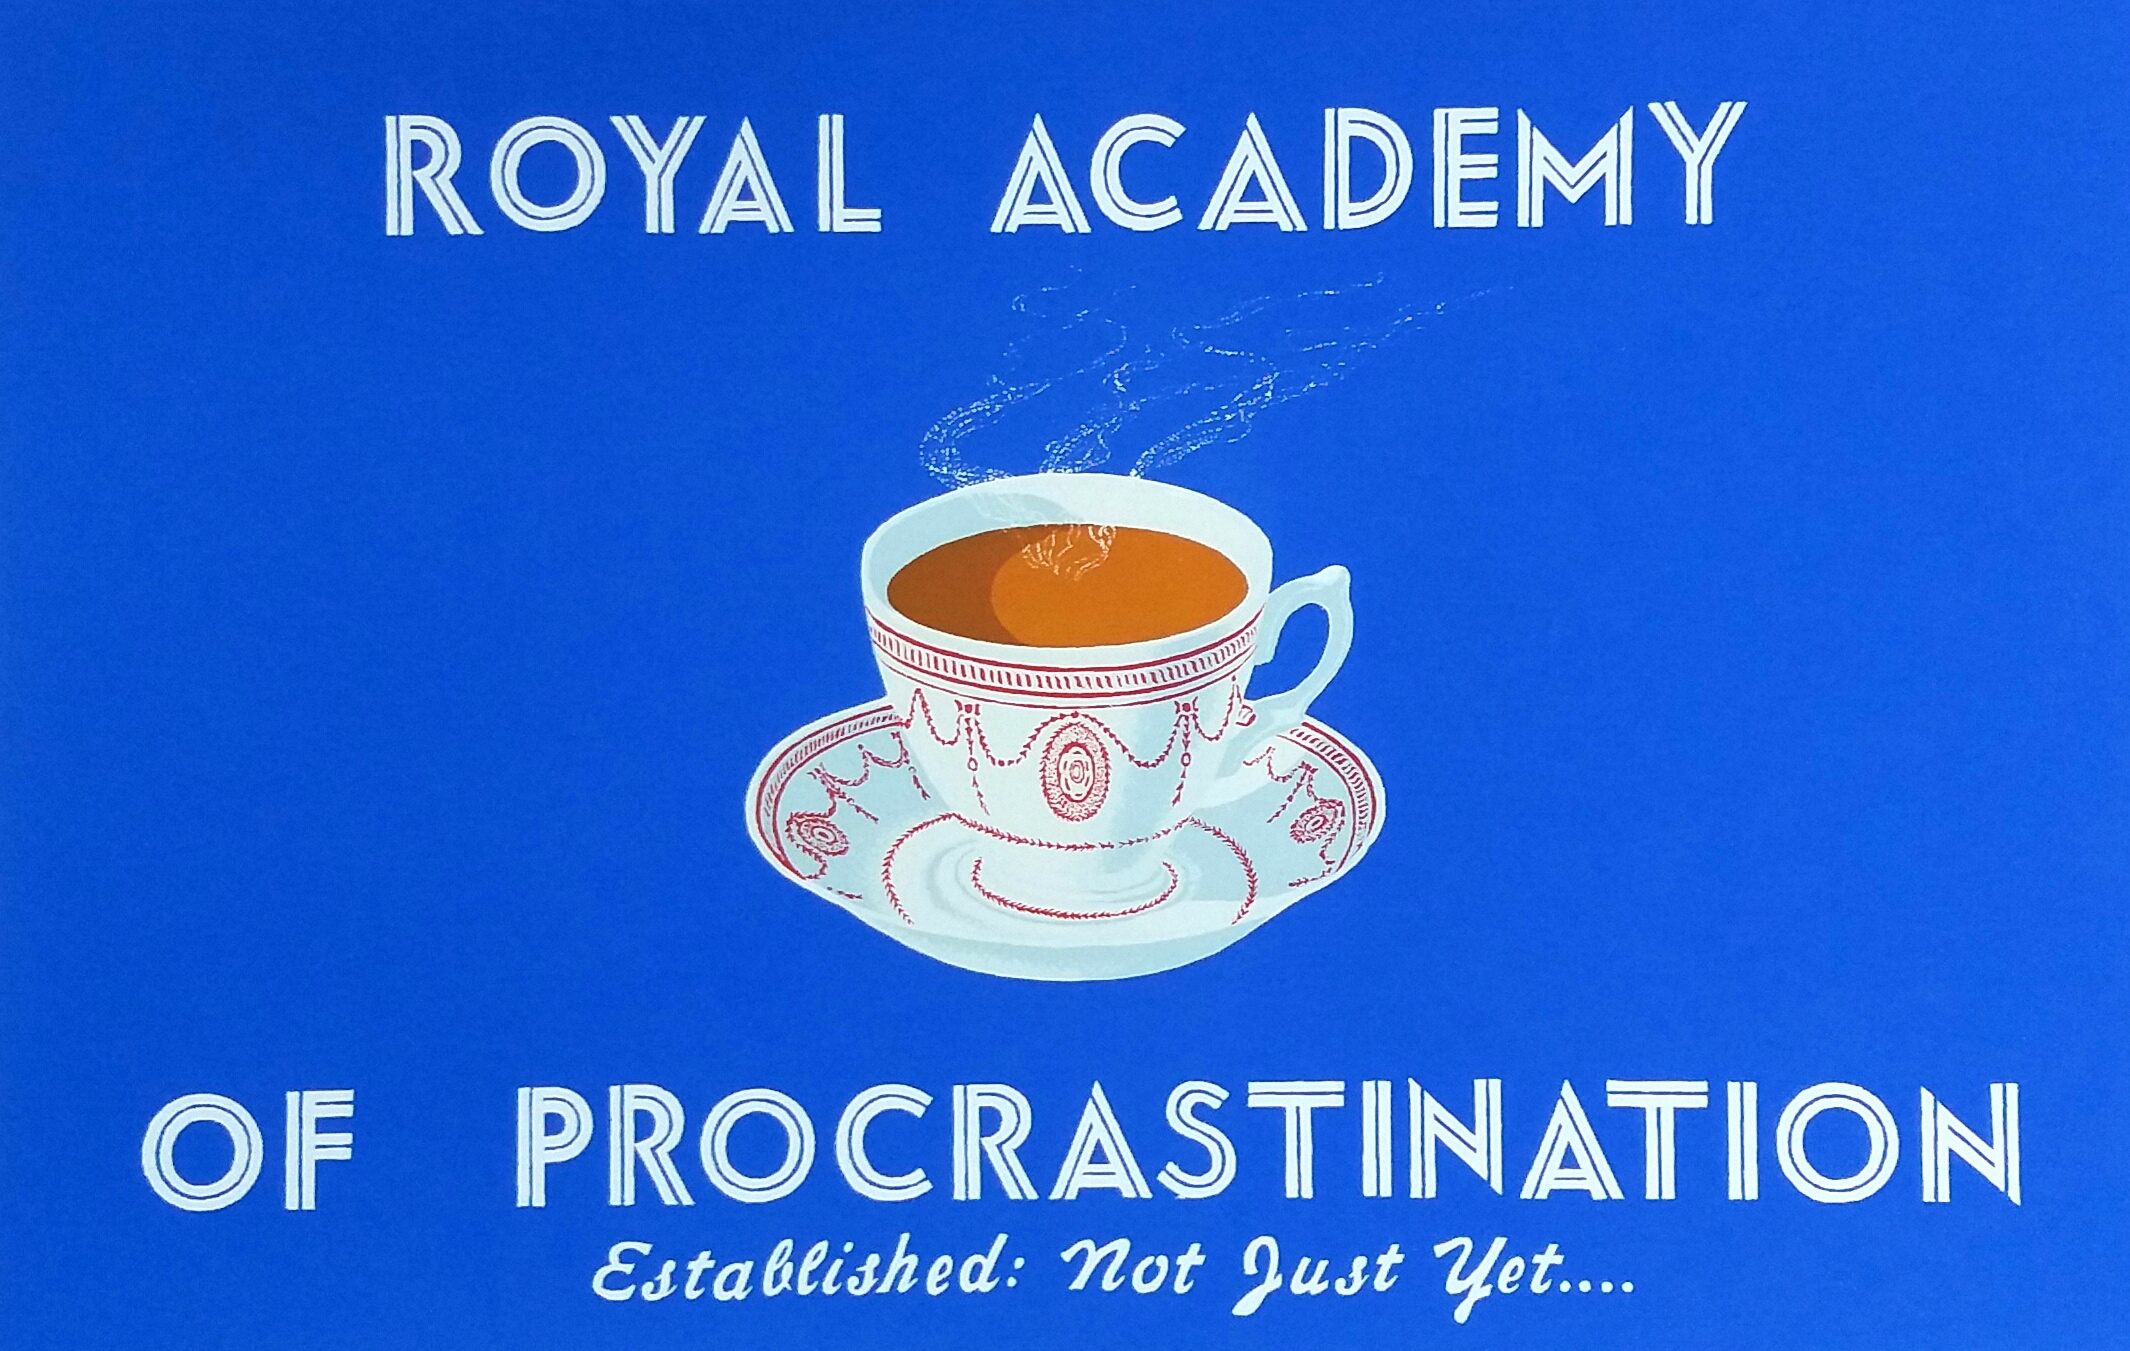 Martin Grover, The Royal Academy of Procrastination, The Auction Collective